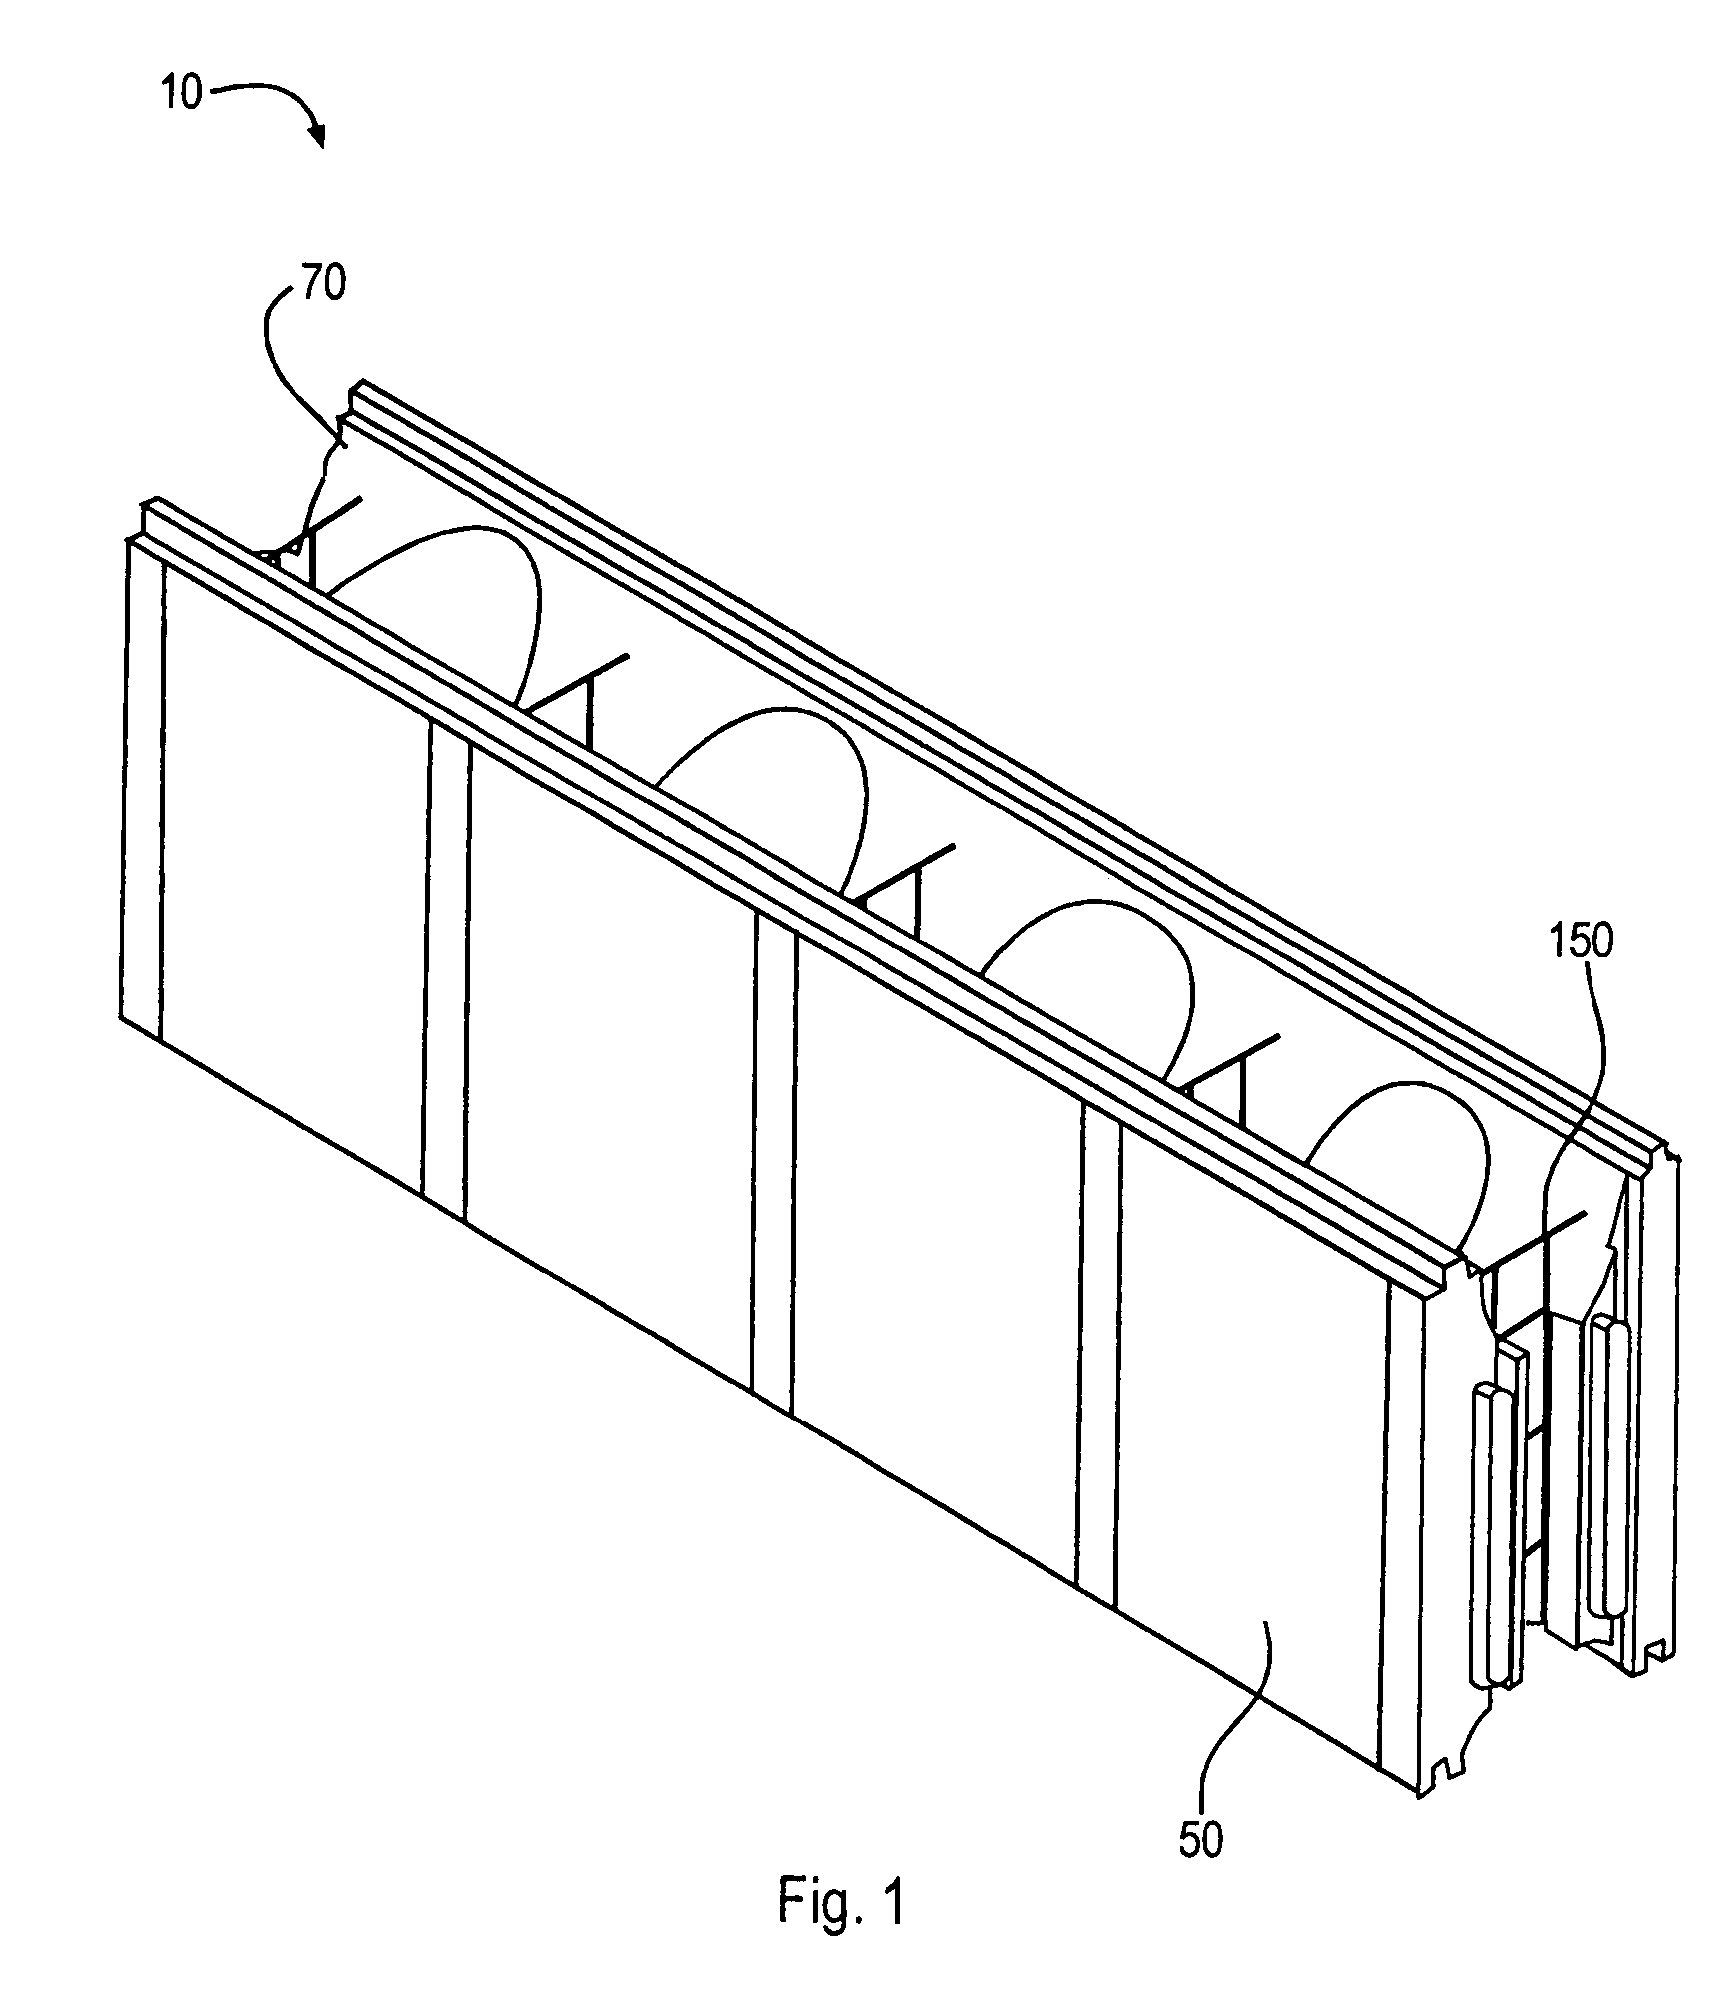 Isulated concrete form having welded wire form tie